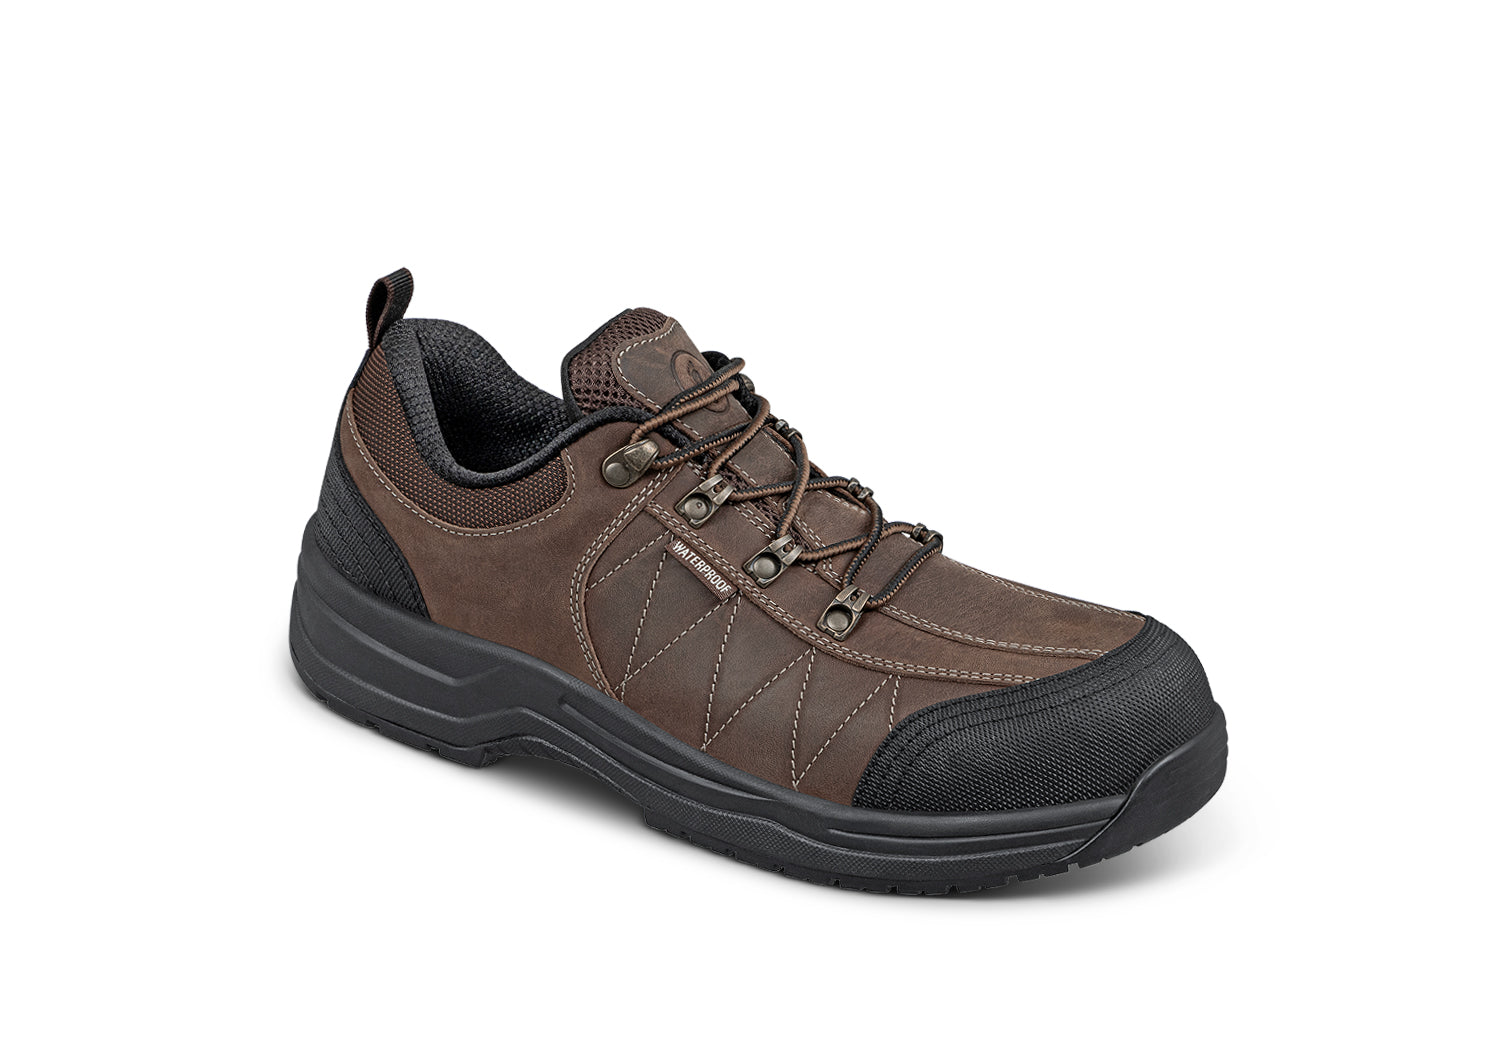 Men's Work Shoes Safety Composite Toe